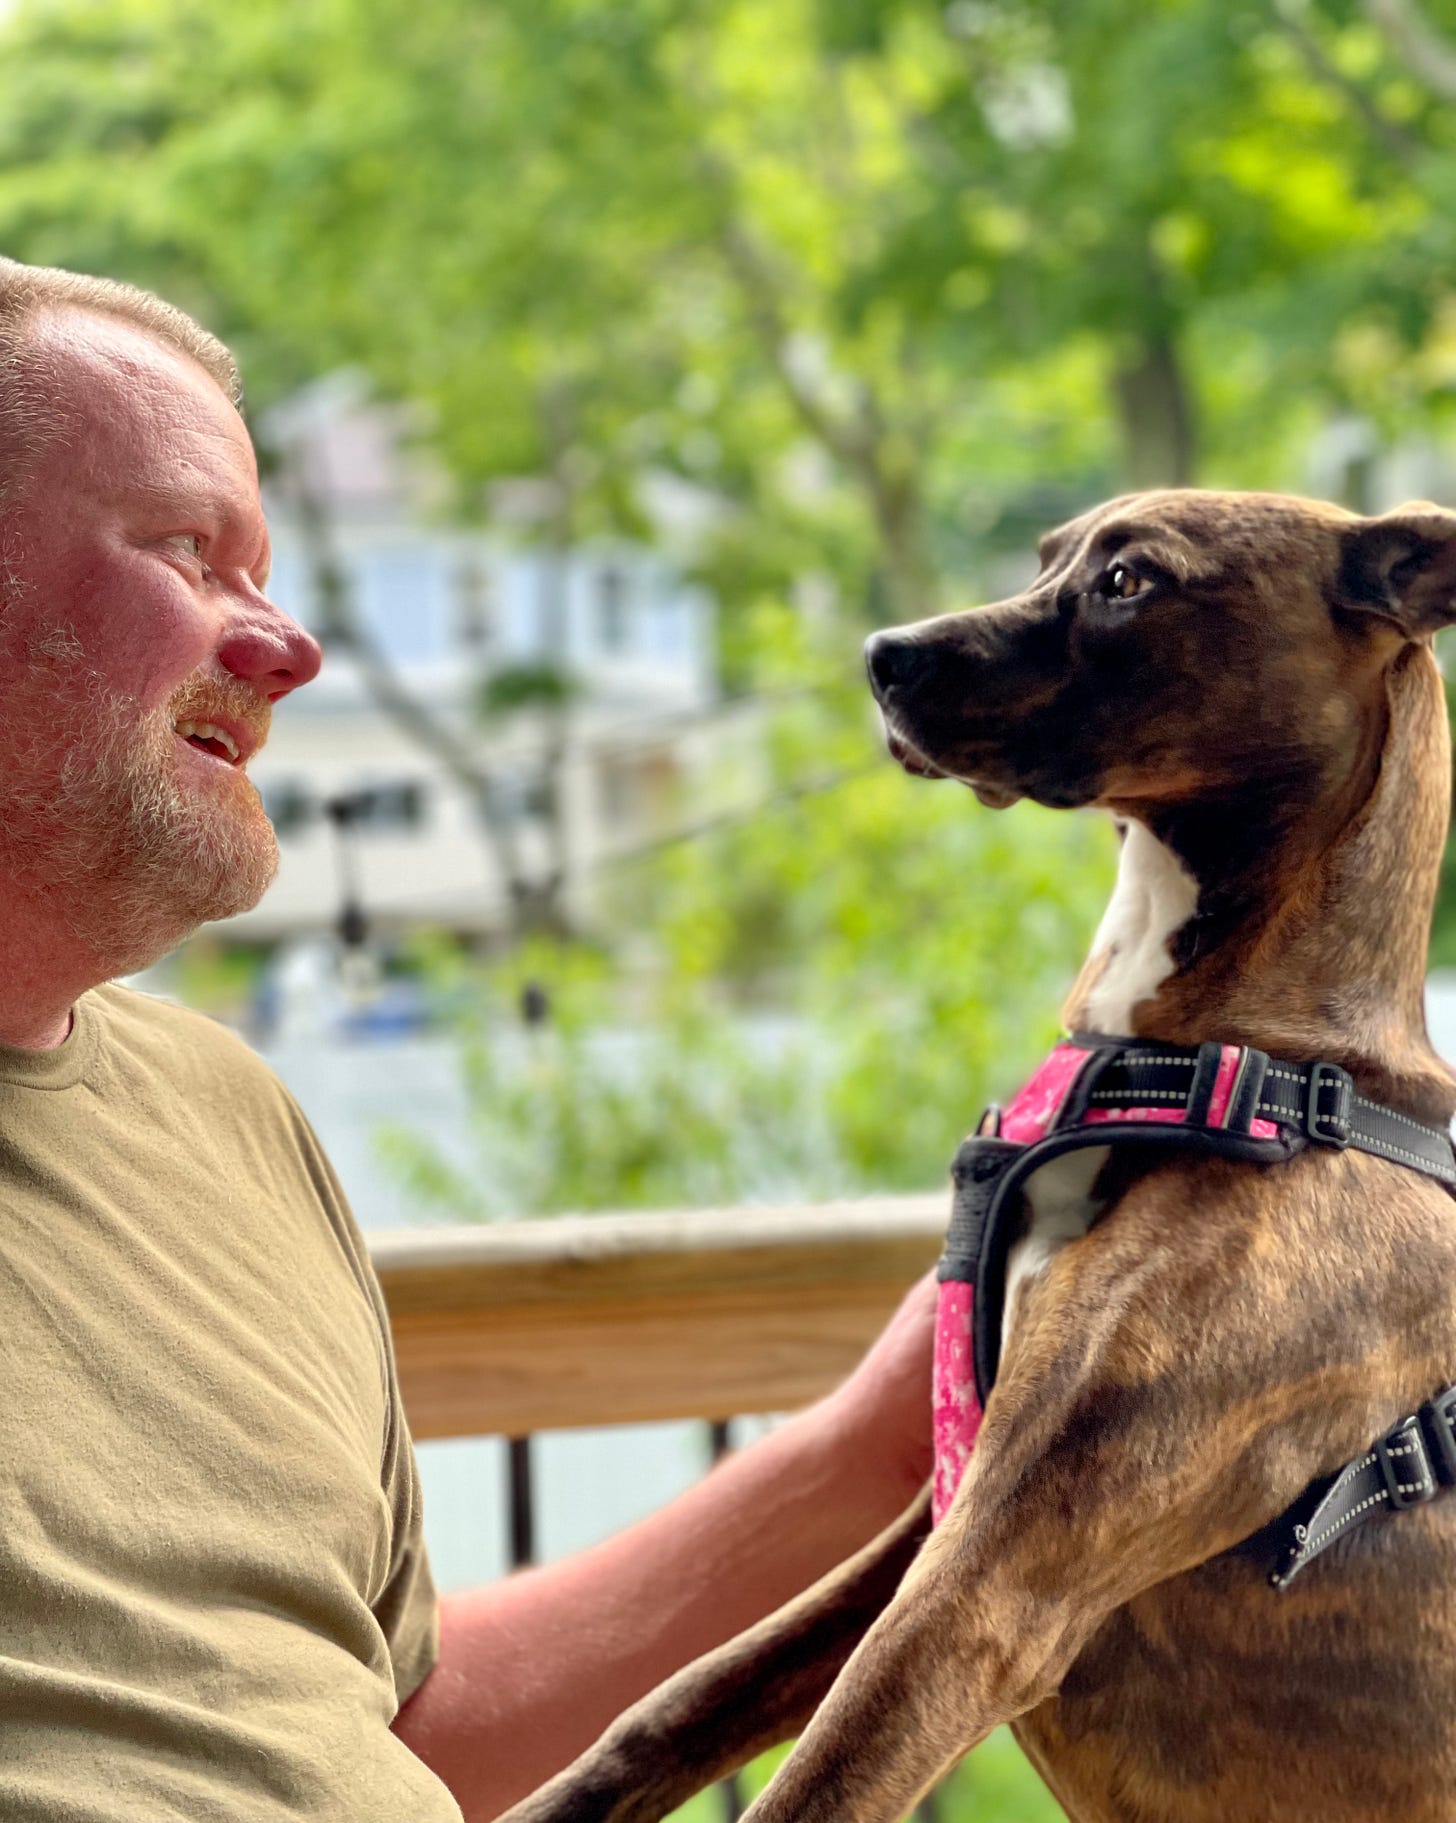 Man and dog outside, staring into each others' eyes